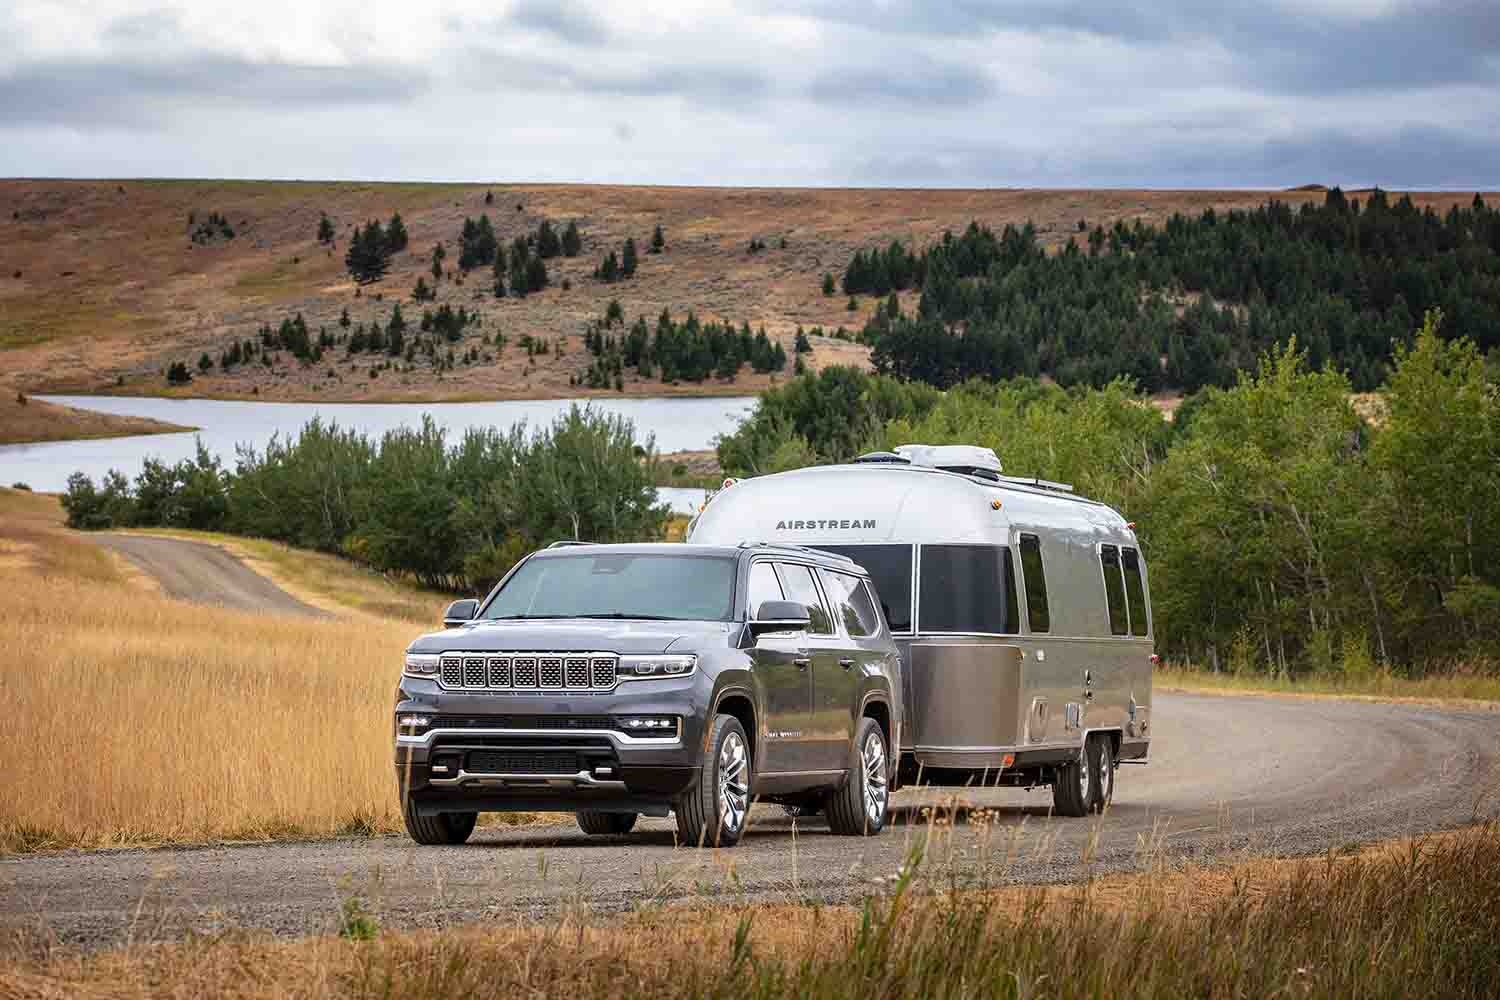  2023 Jeep Grand Wagoneer L in silver towing an Airstream